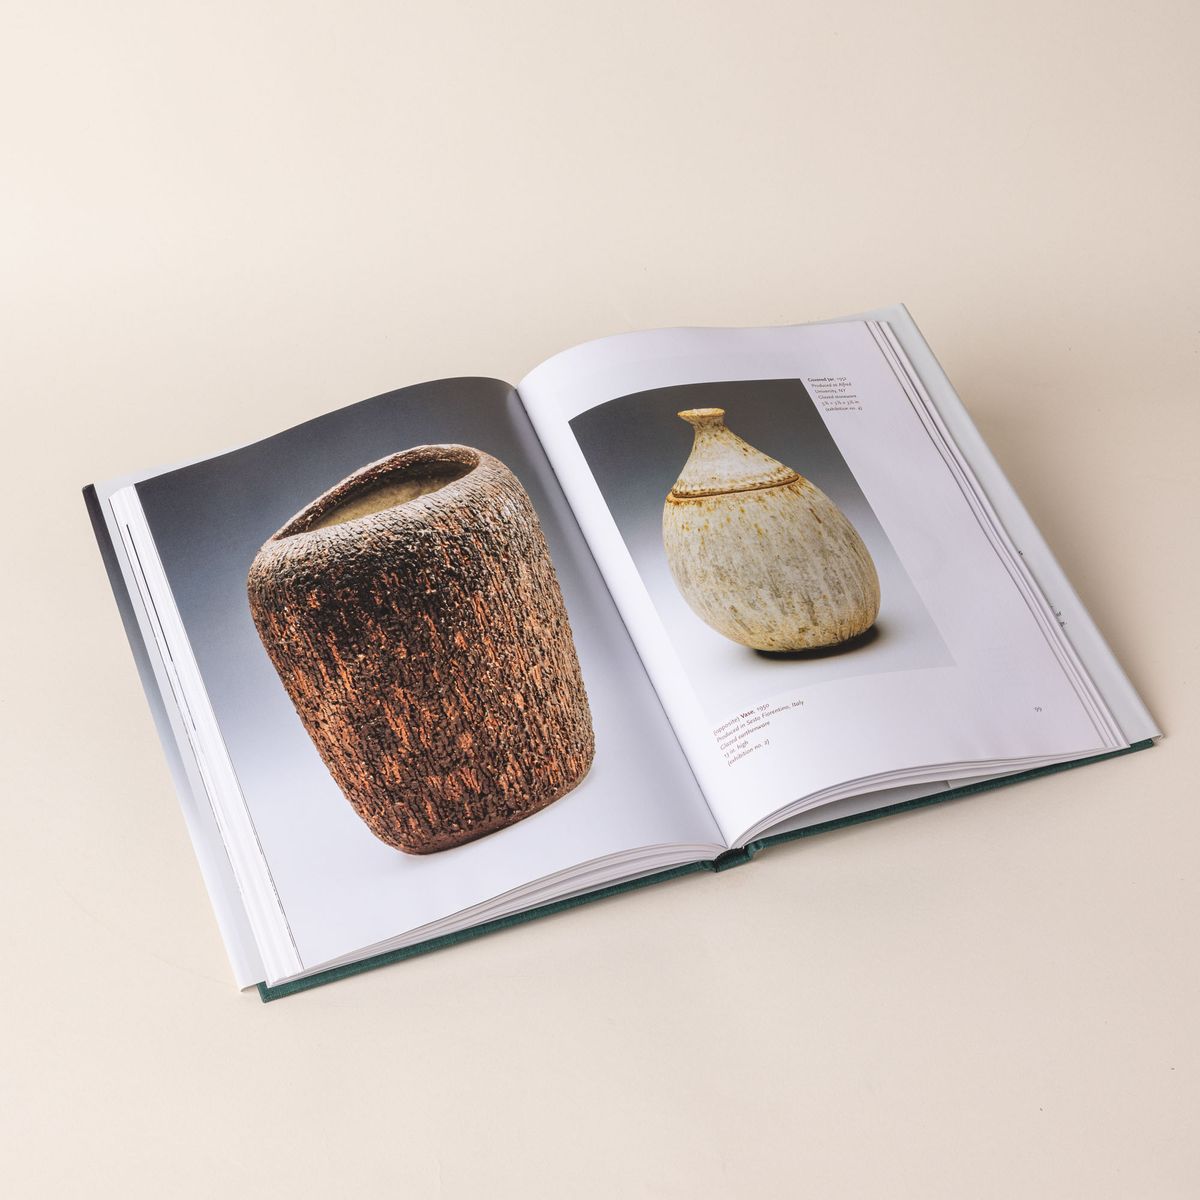 An open hardcover book featuring two different photos of ceramic pottery vases.